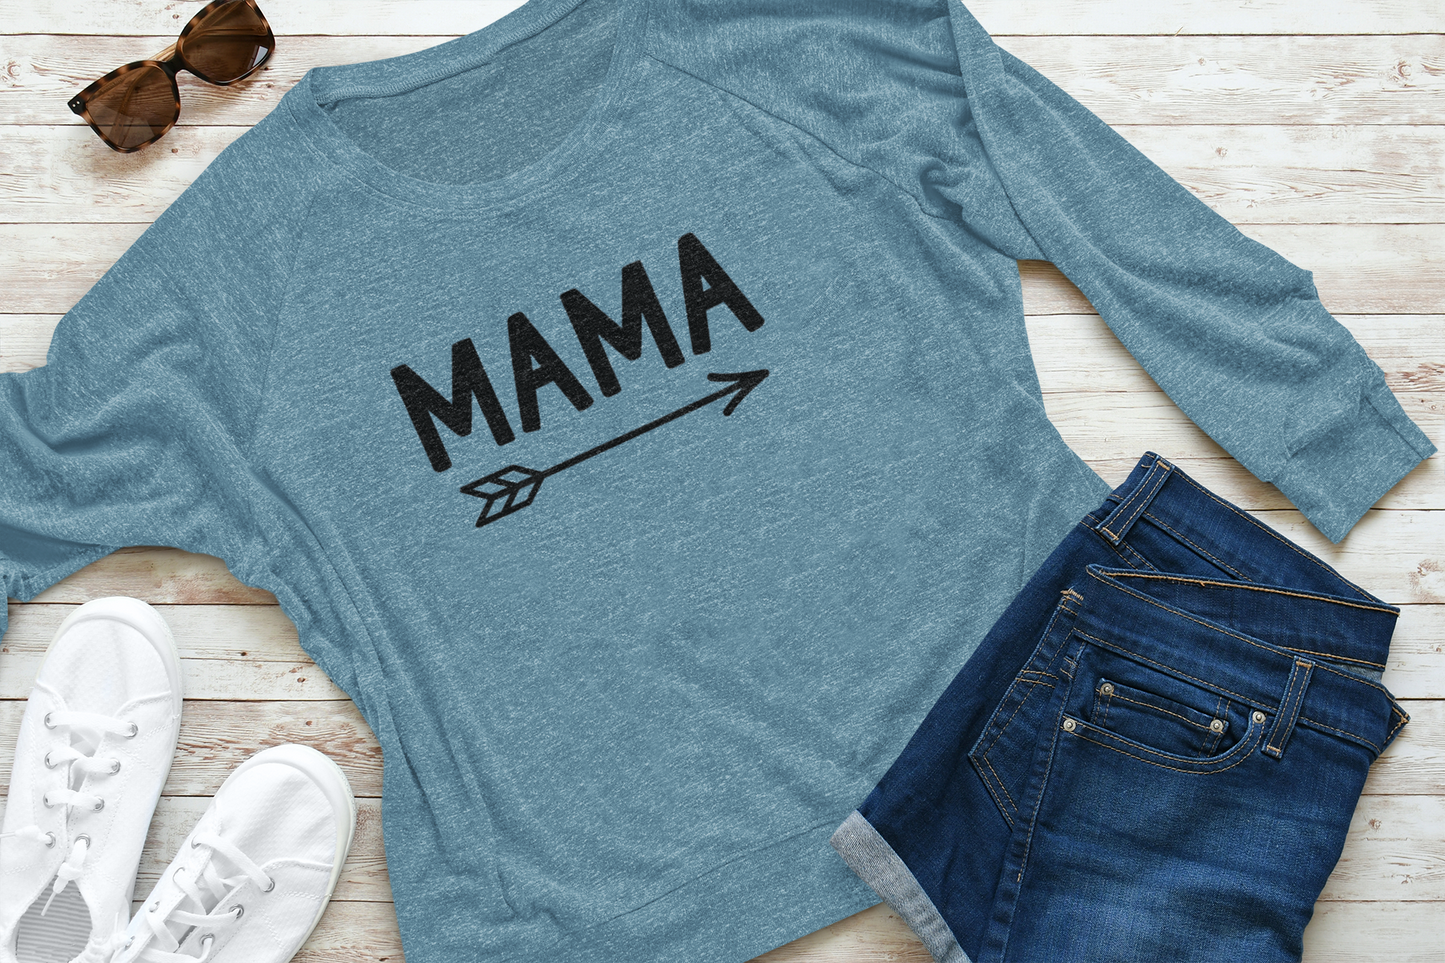 Mama Long Sleeve Shirt in blue laid out flat with white tennis shoes, shorts and sunglasses next to it.